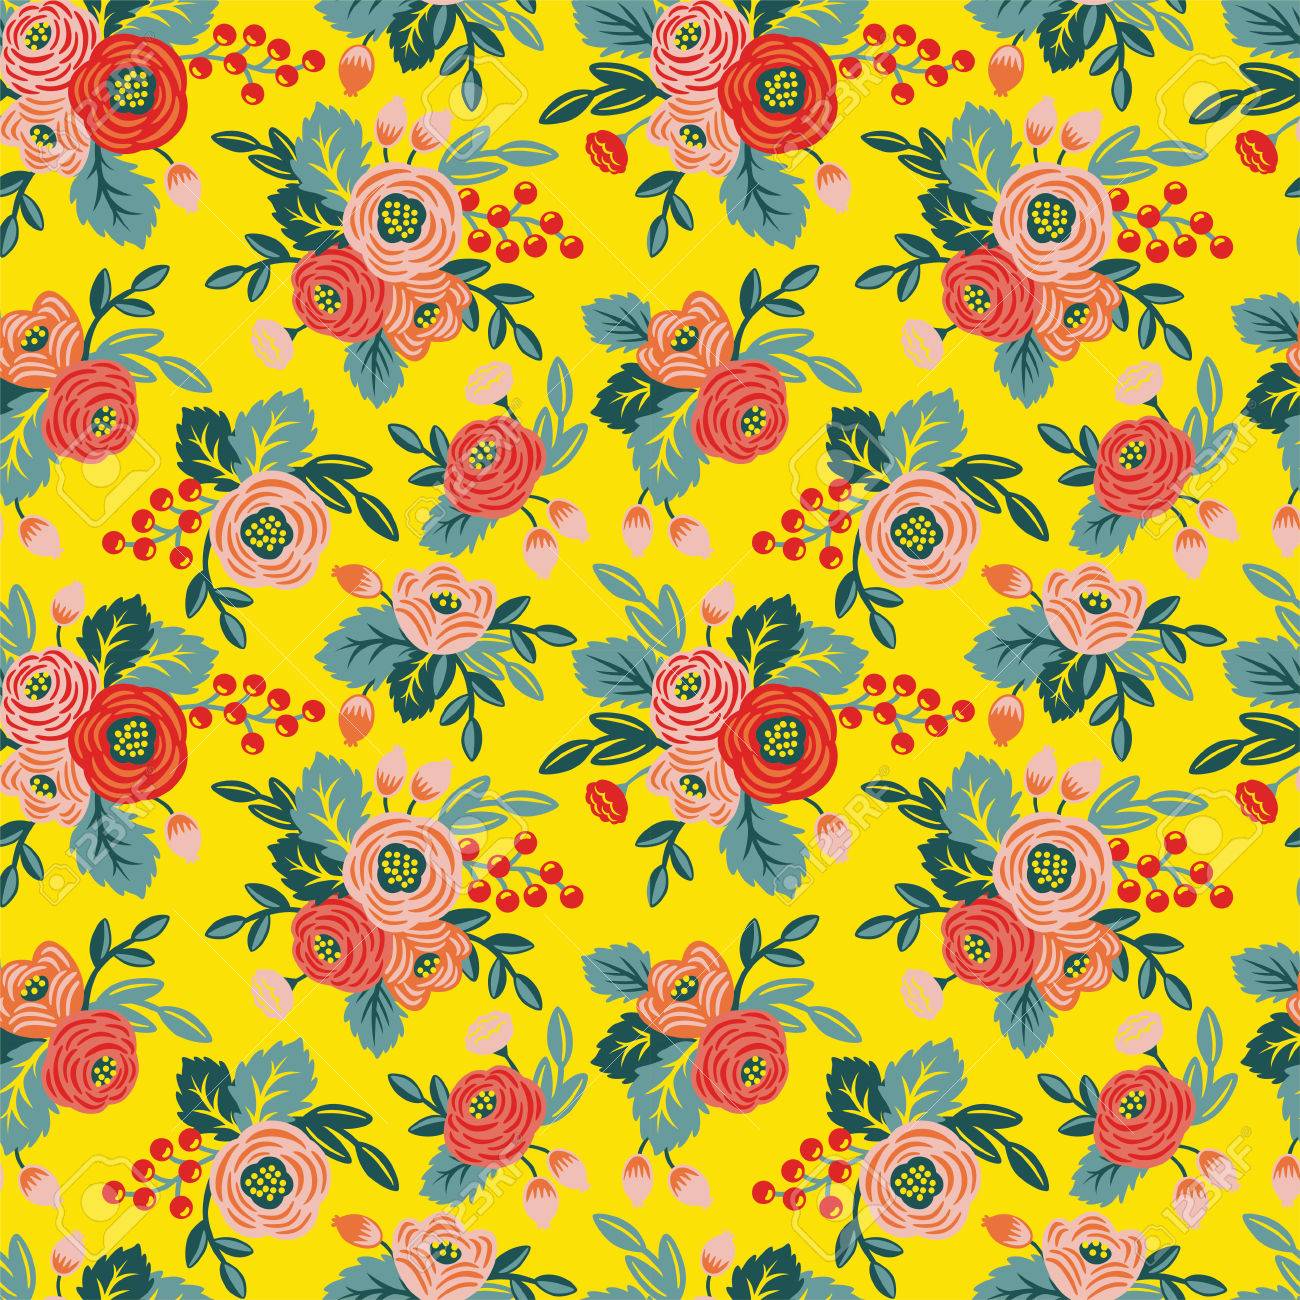 Floral Seamless Pattern On A Yellow Background For Wallpaper